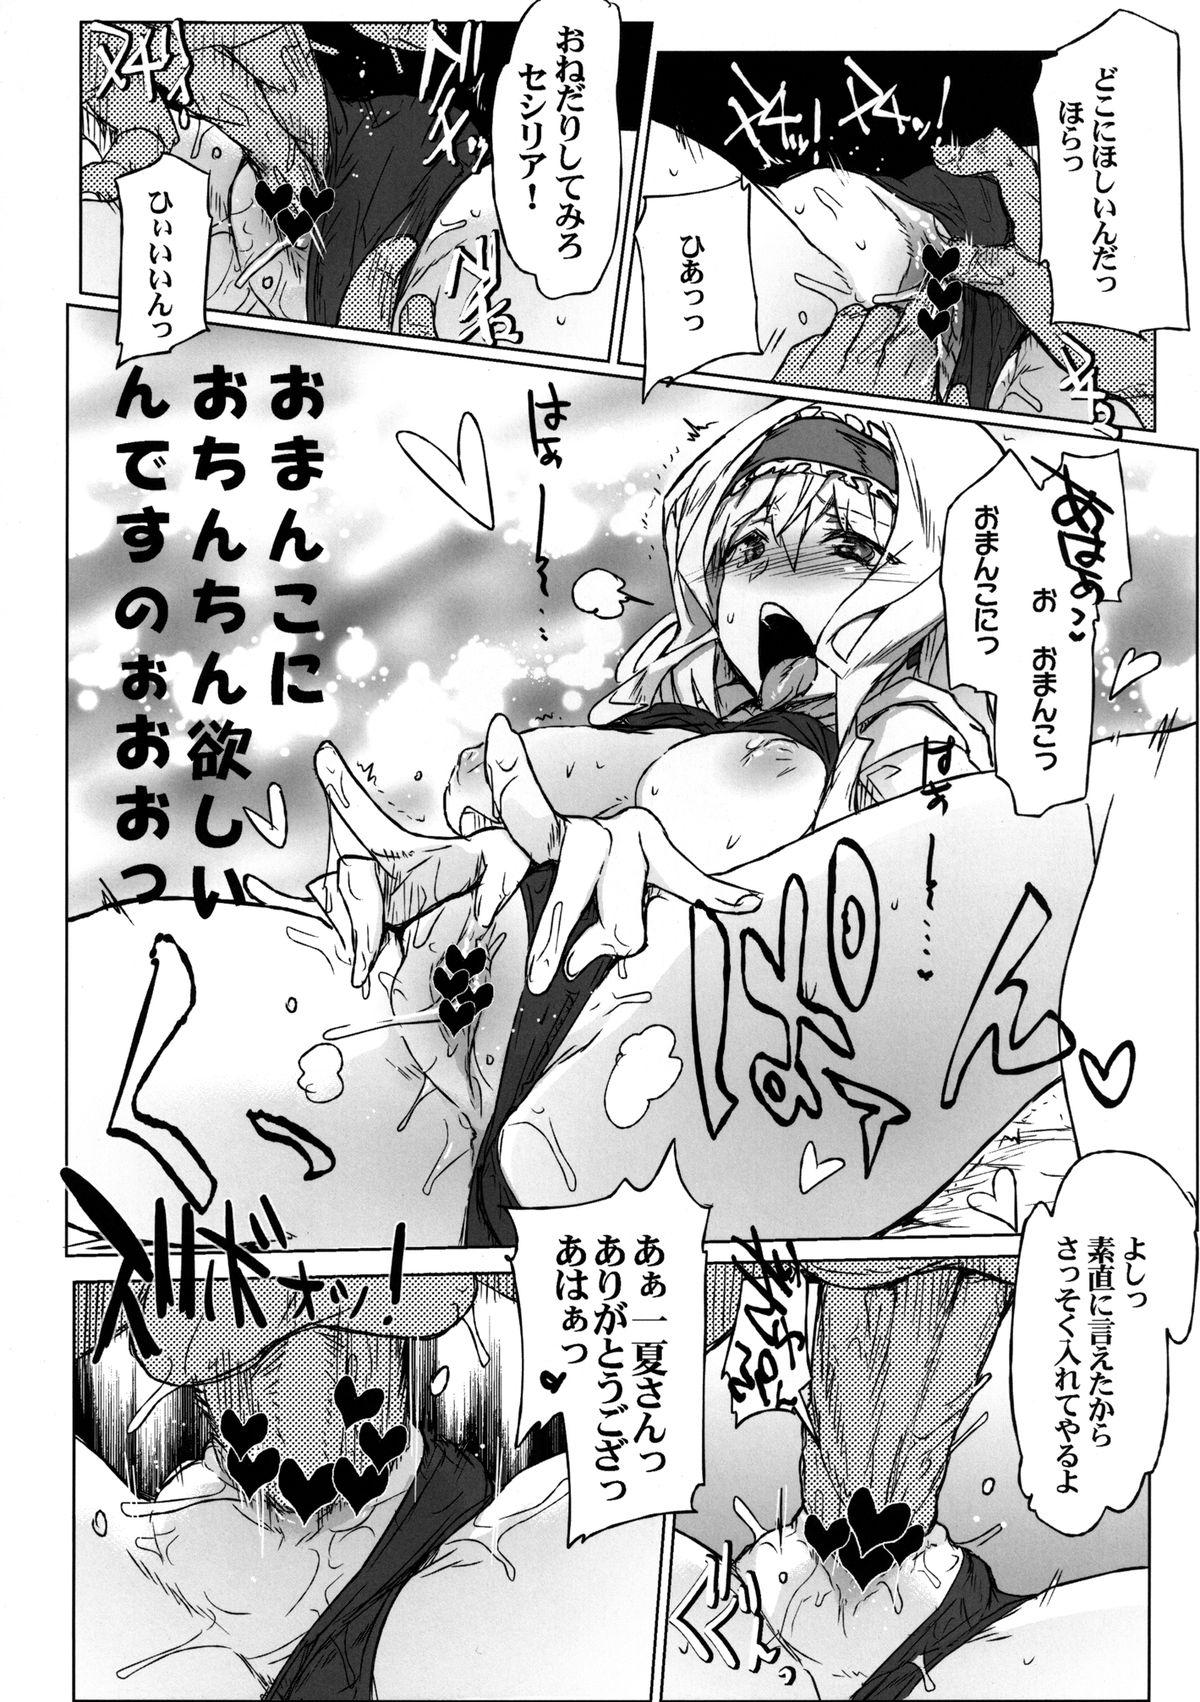 X IS Girls 2 - Infinite stratos Realamateur - Page 12